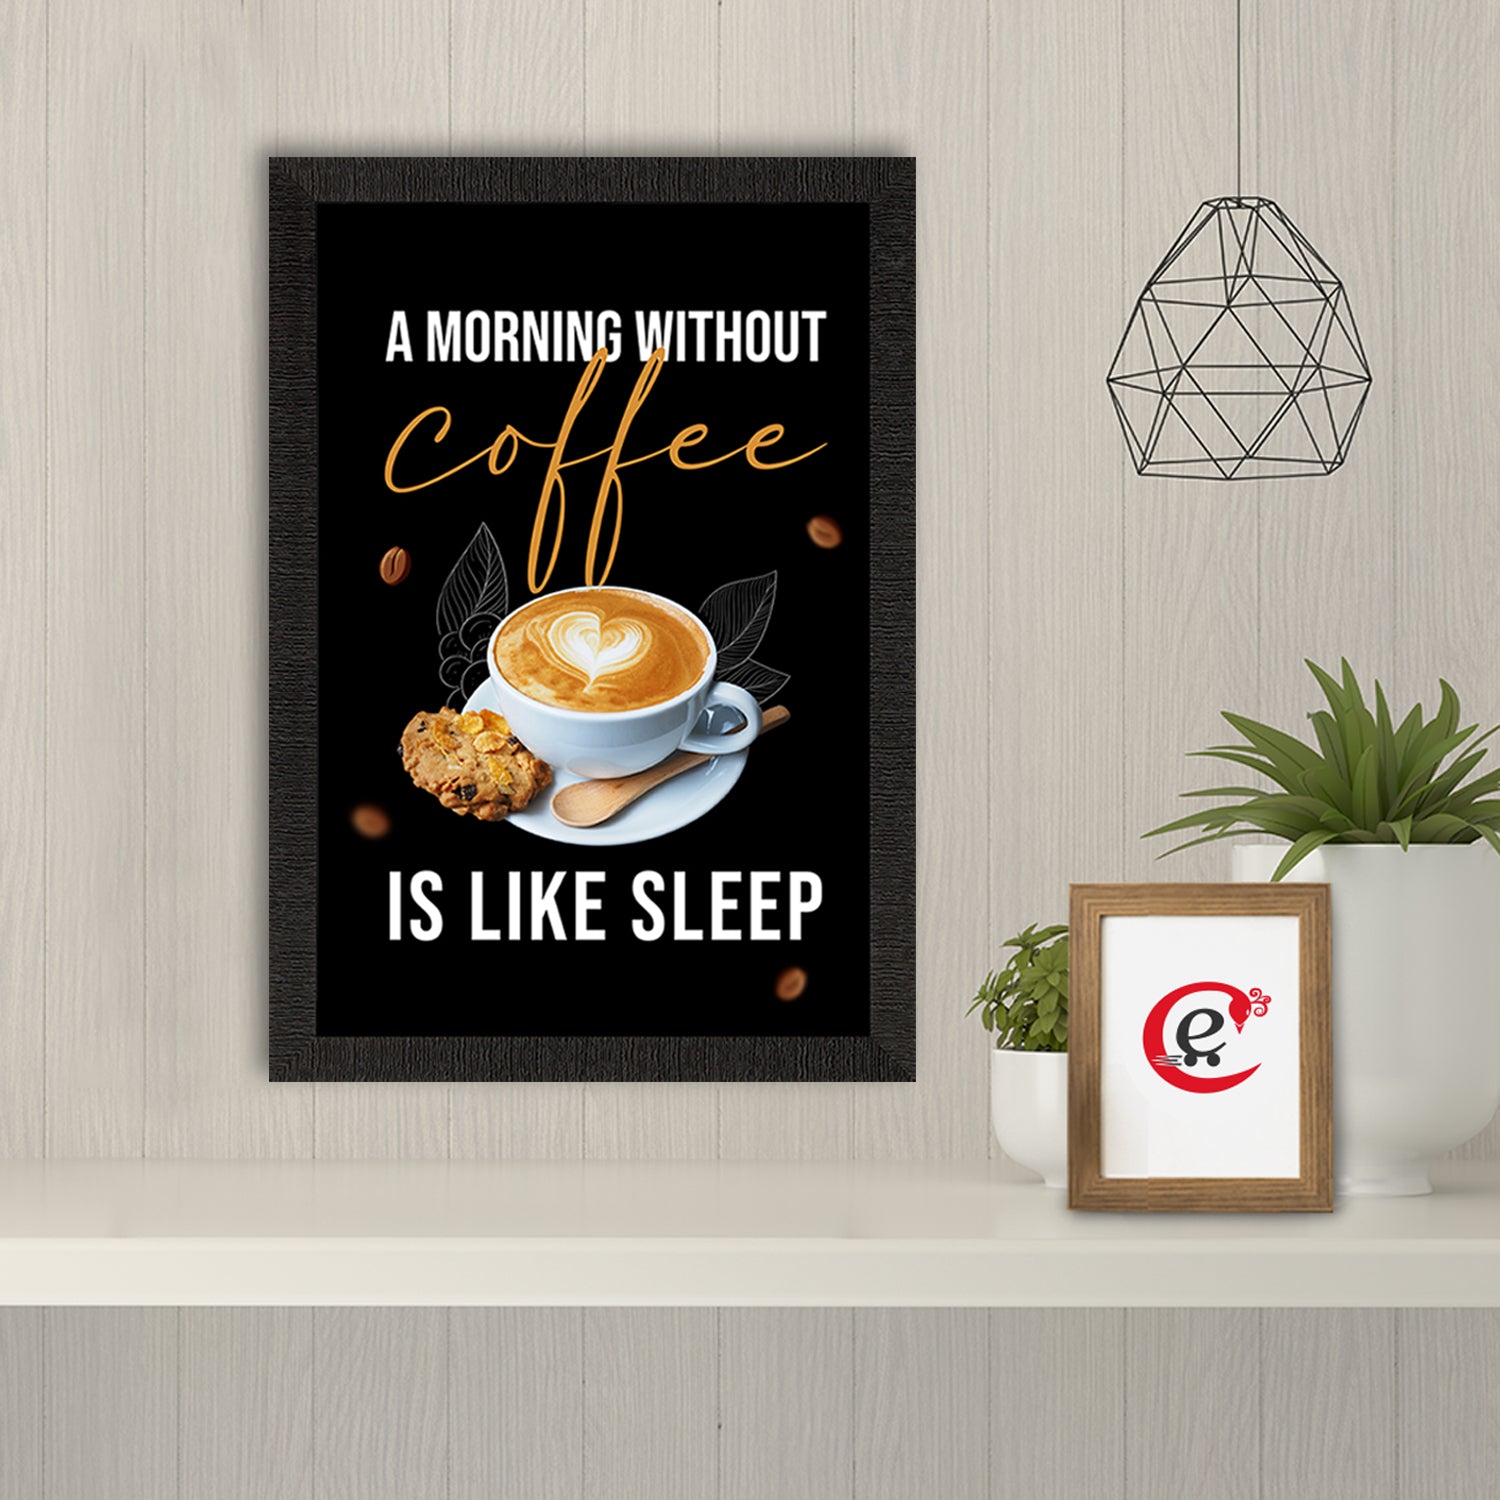 "A Morning without Coffee" Quirky Quote Satin Matt Texture UV Art Painting 1